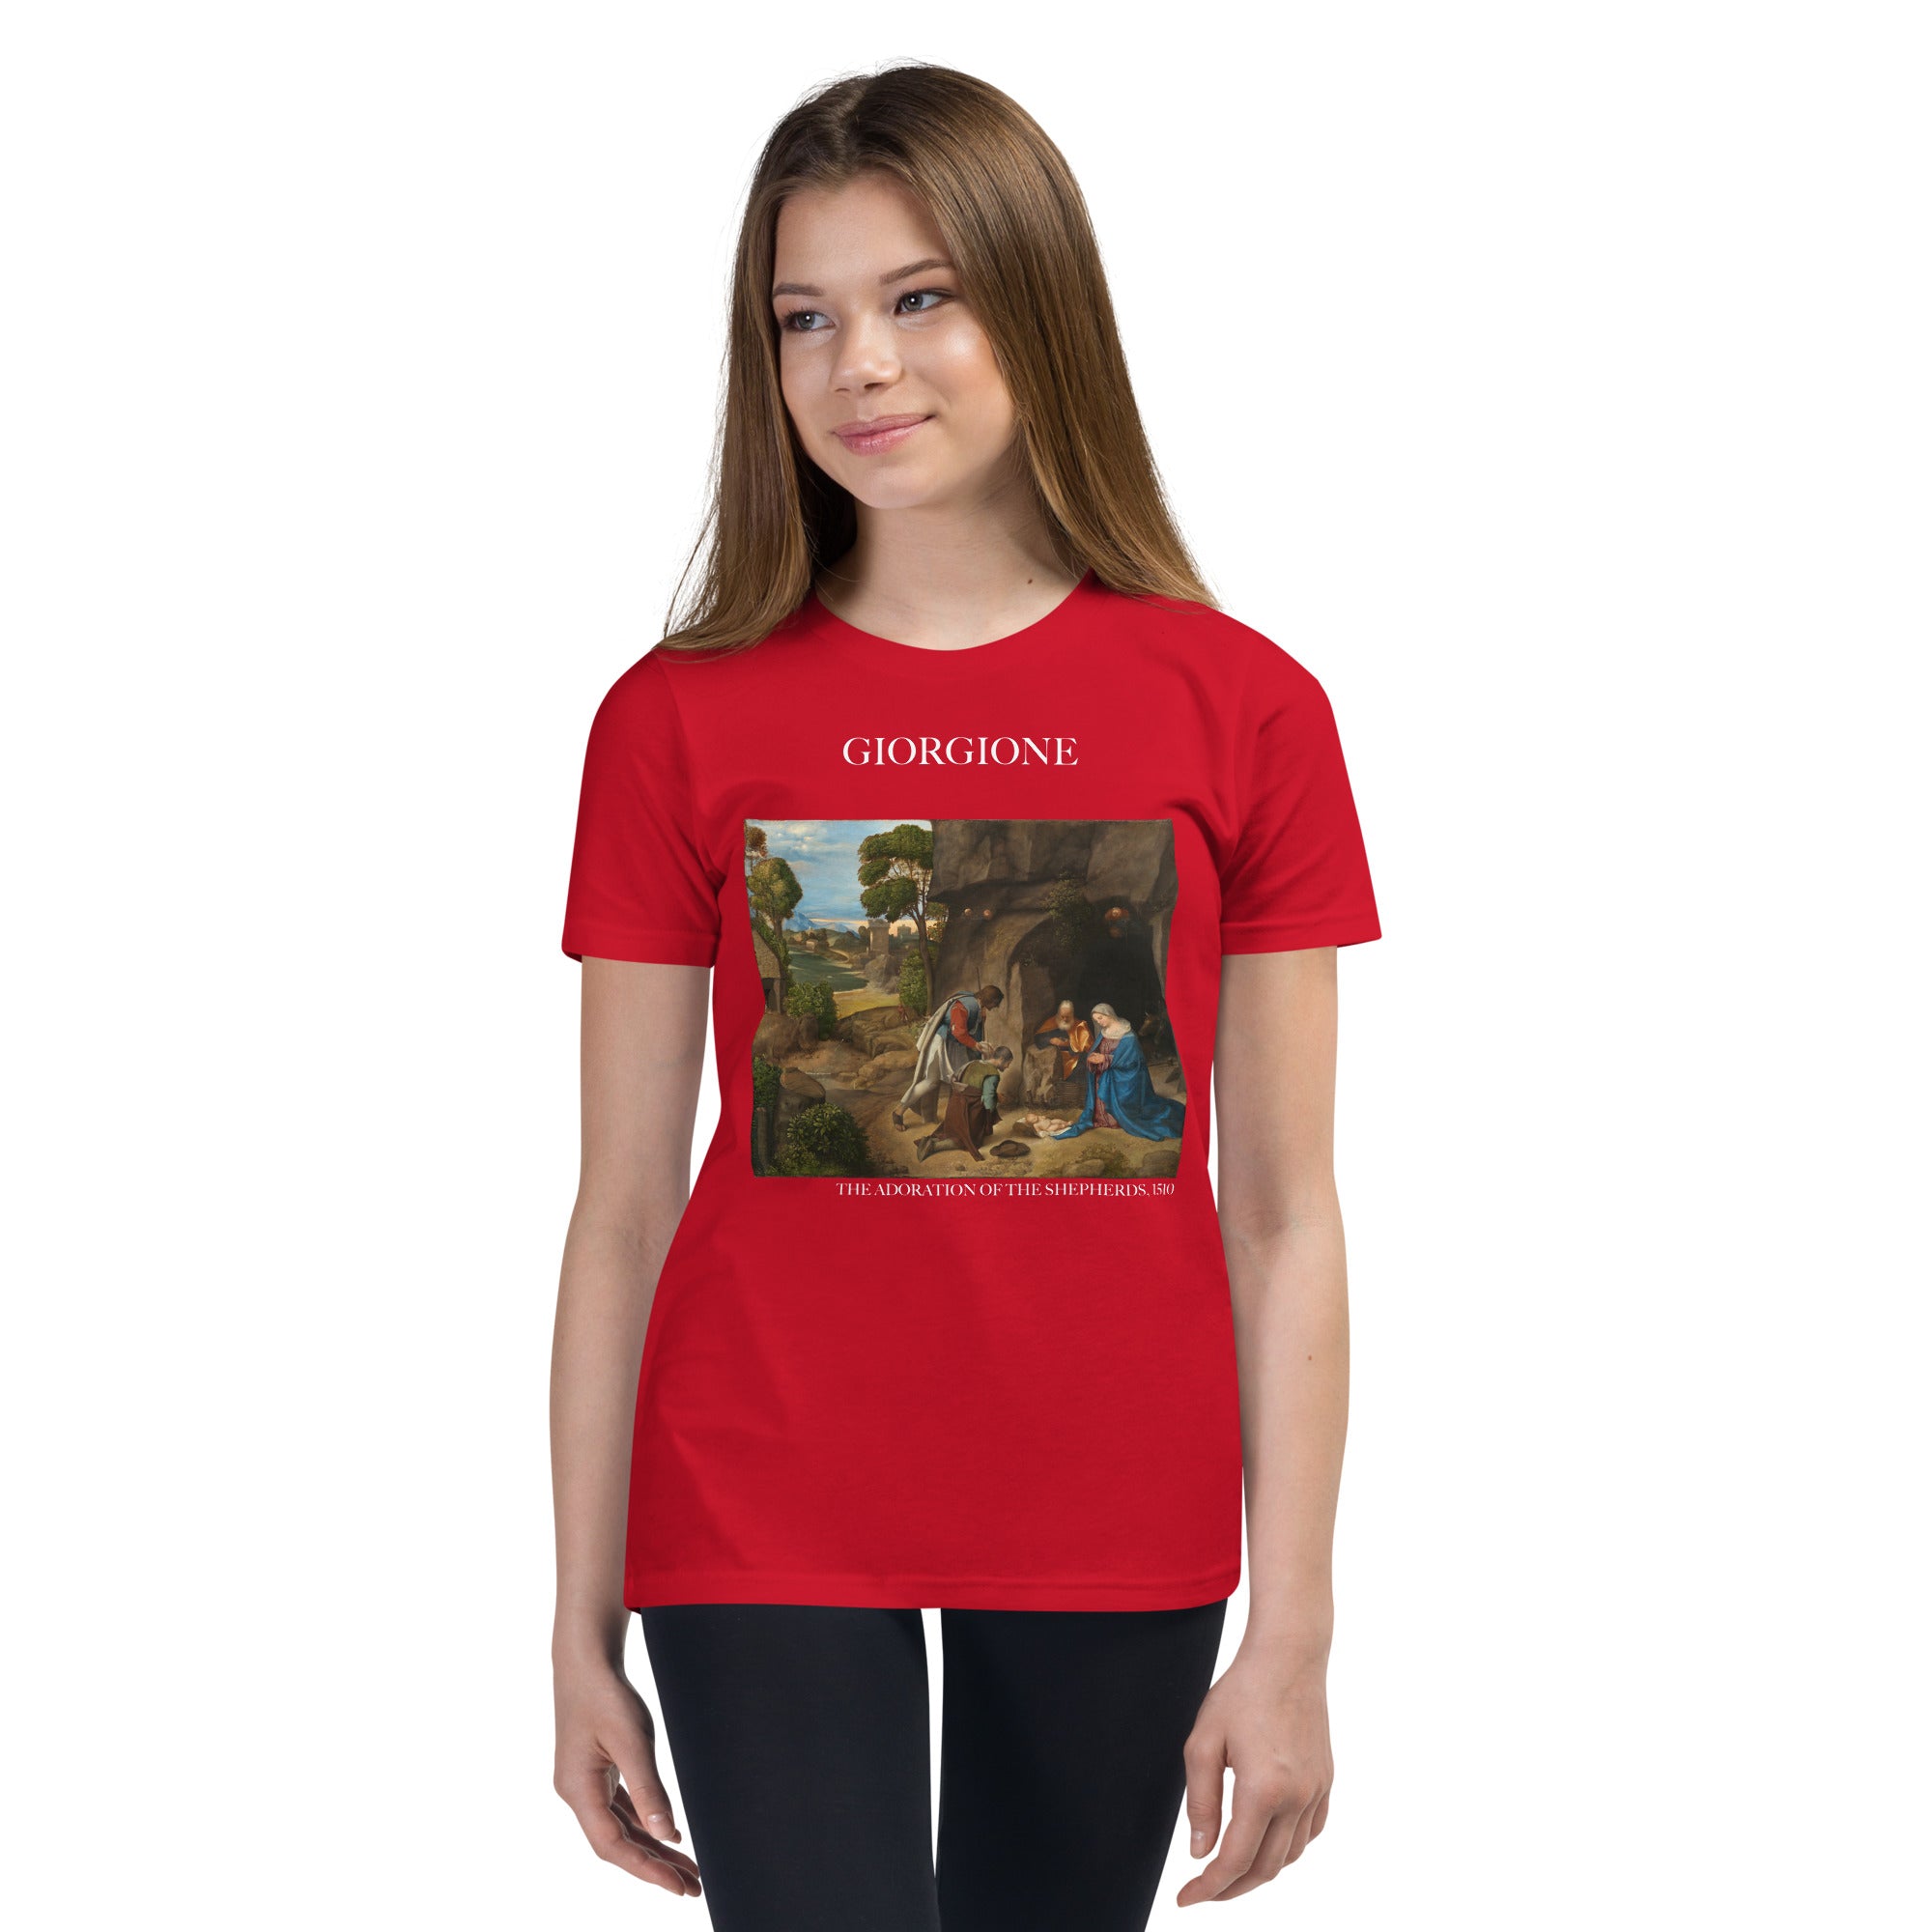 Giorgione 'The Adoration of the Shepherds' Famous Painting Short Sleeve T-Shirt | Premium Youth Art Tee